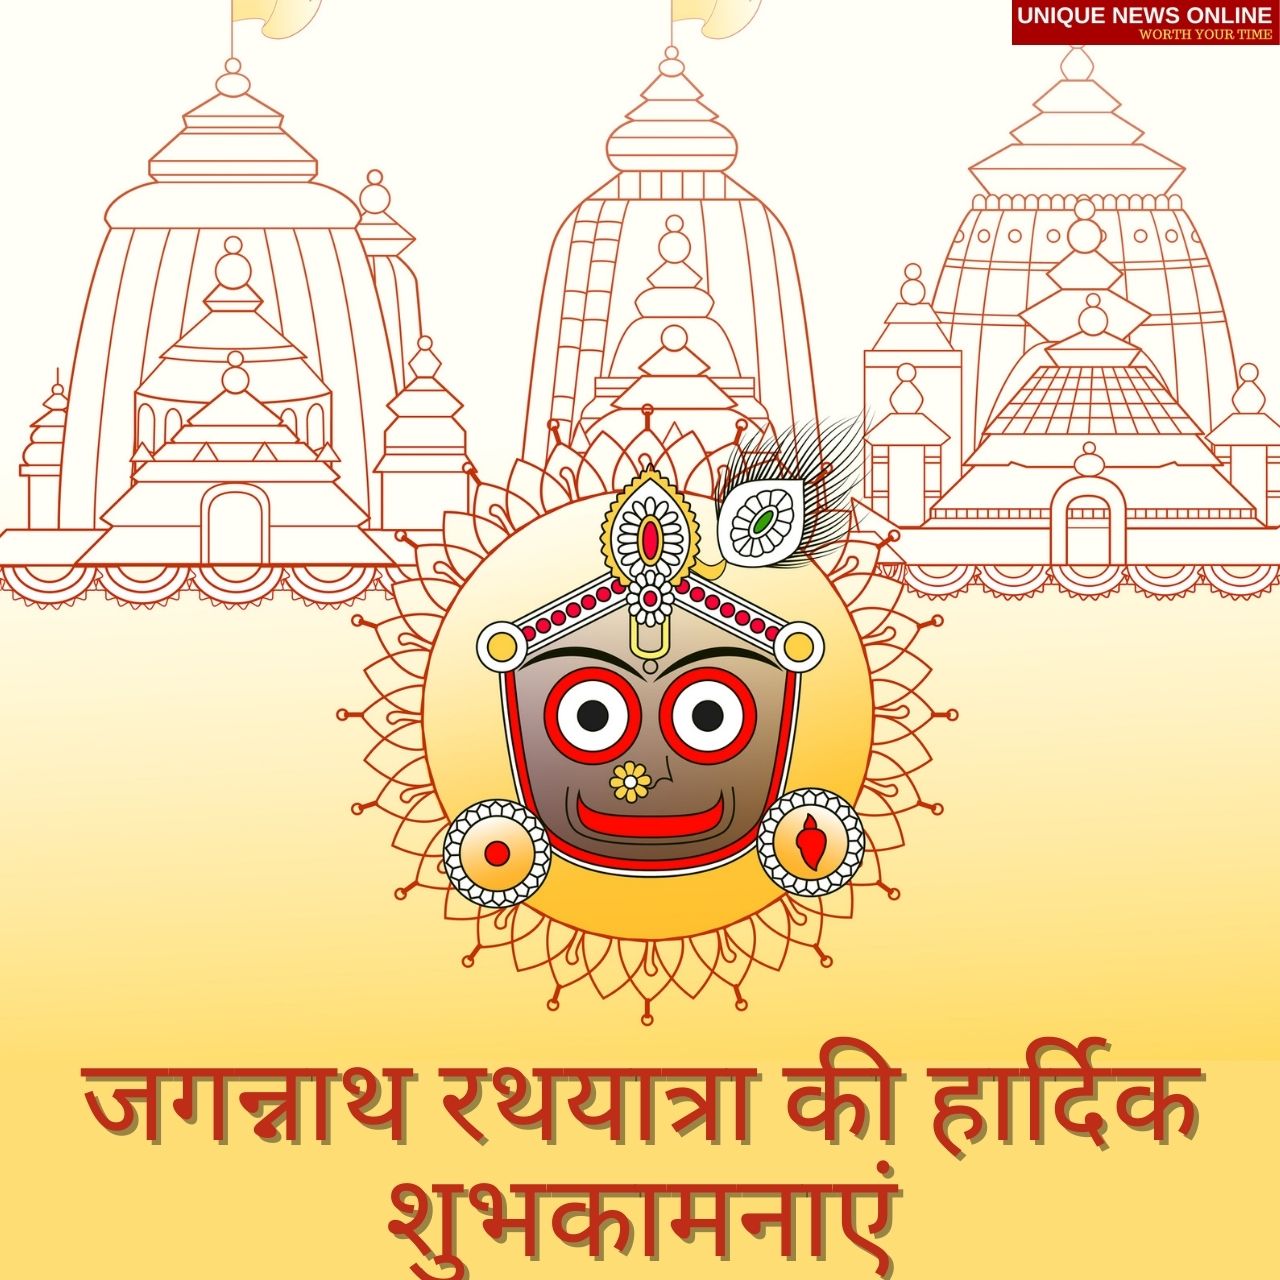 Happy Jagannath Rath Yatra 2021 Hindi Wishes, Greetings, Quotes, Images, Messages, and WhatsApp Status to greet your Friends, and Relatives